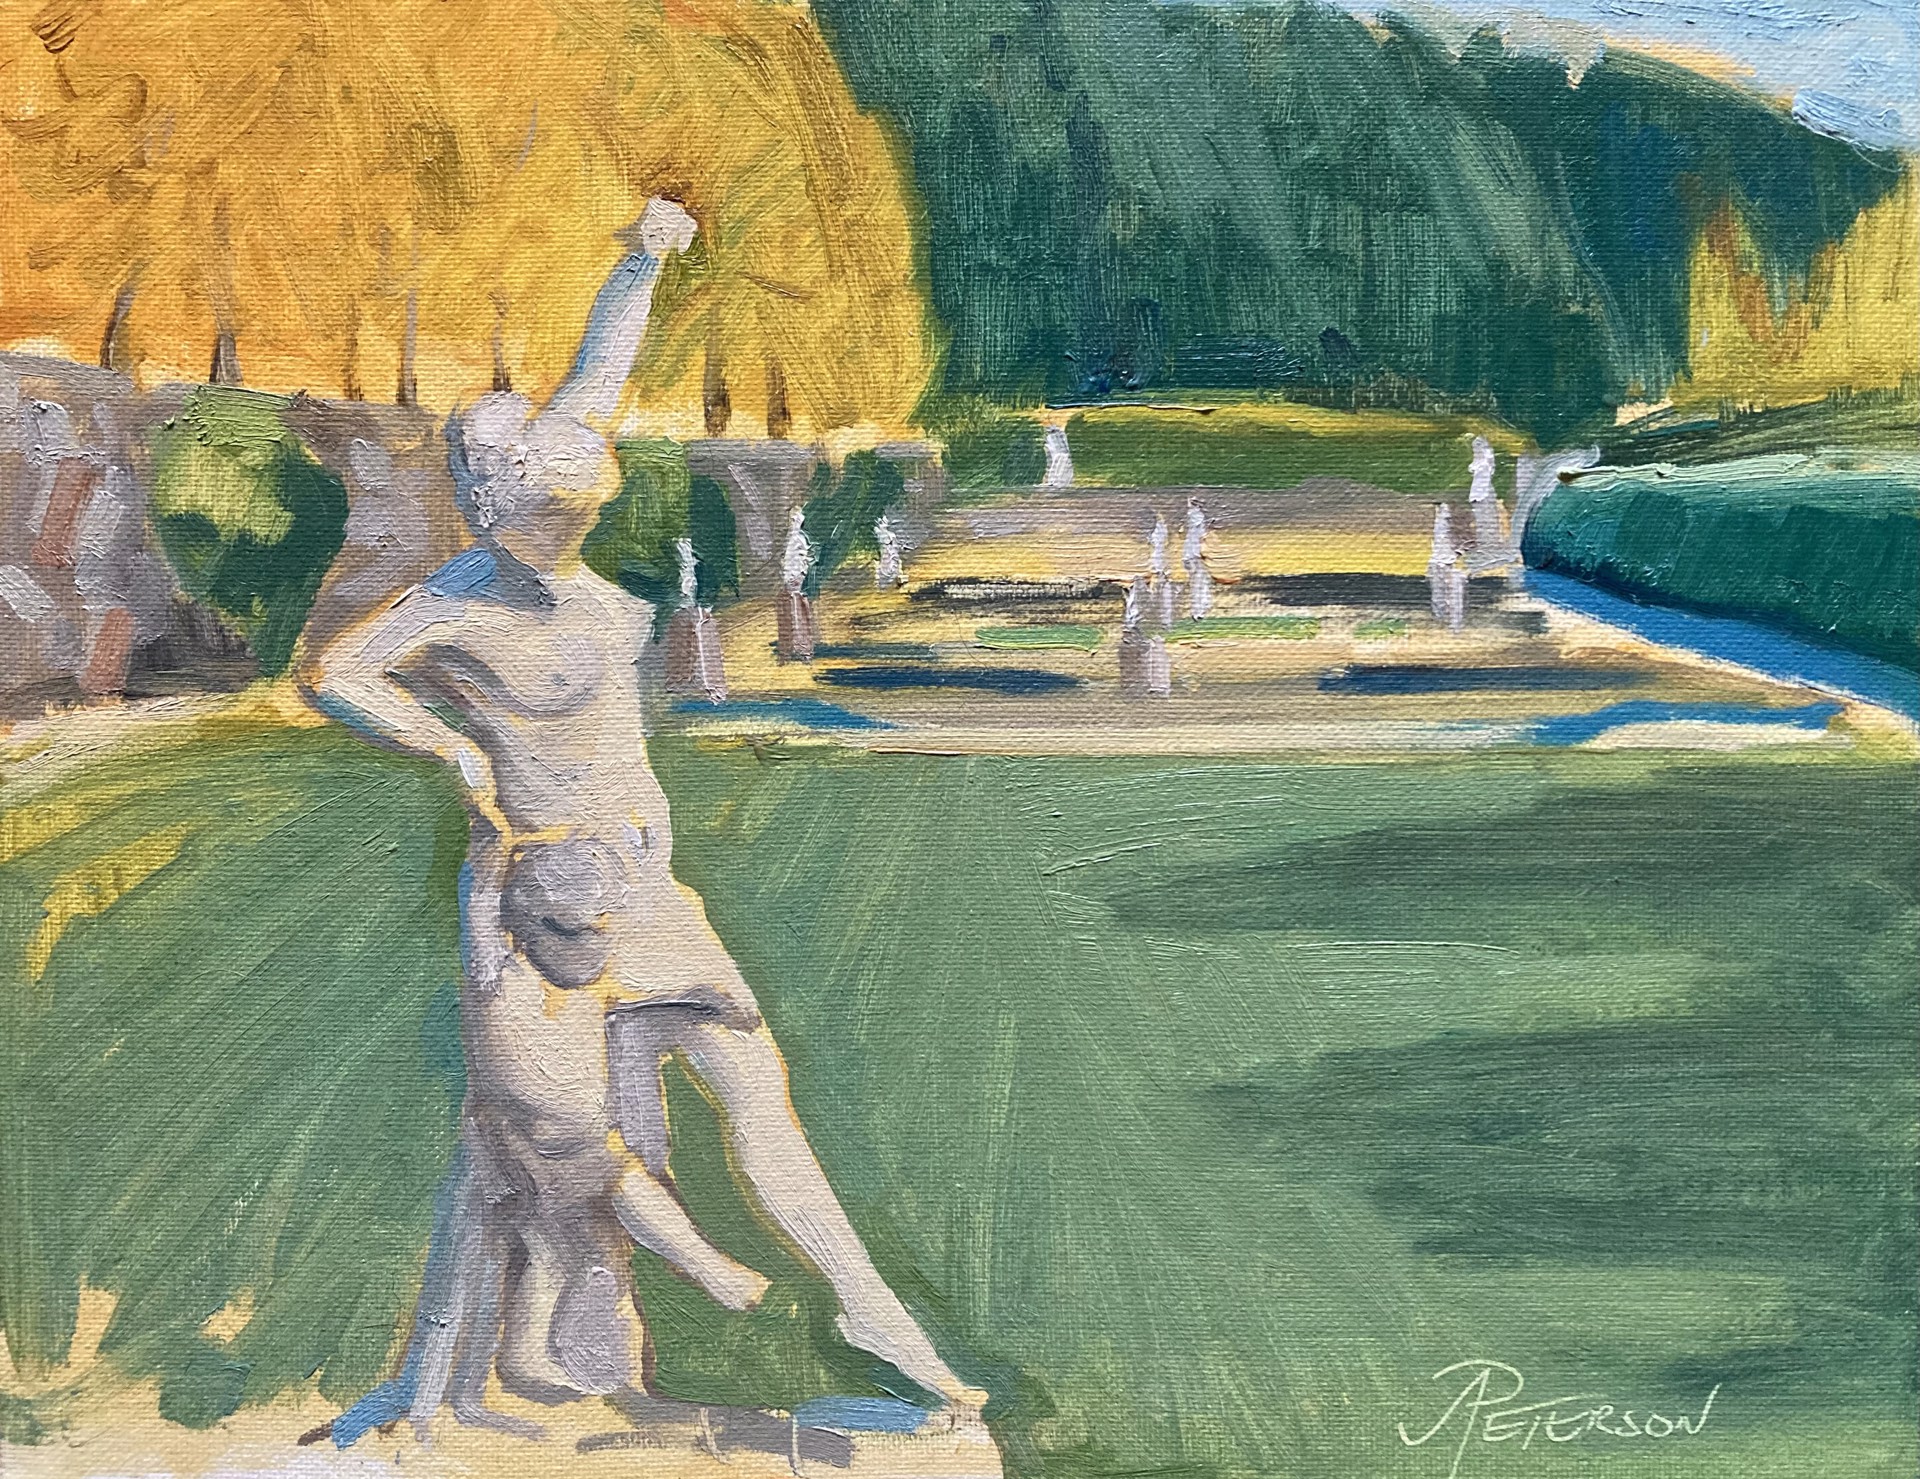 Italian Gardens, Study, Biltmore by Amy R. Peterson